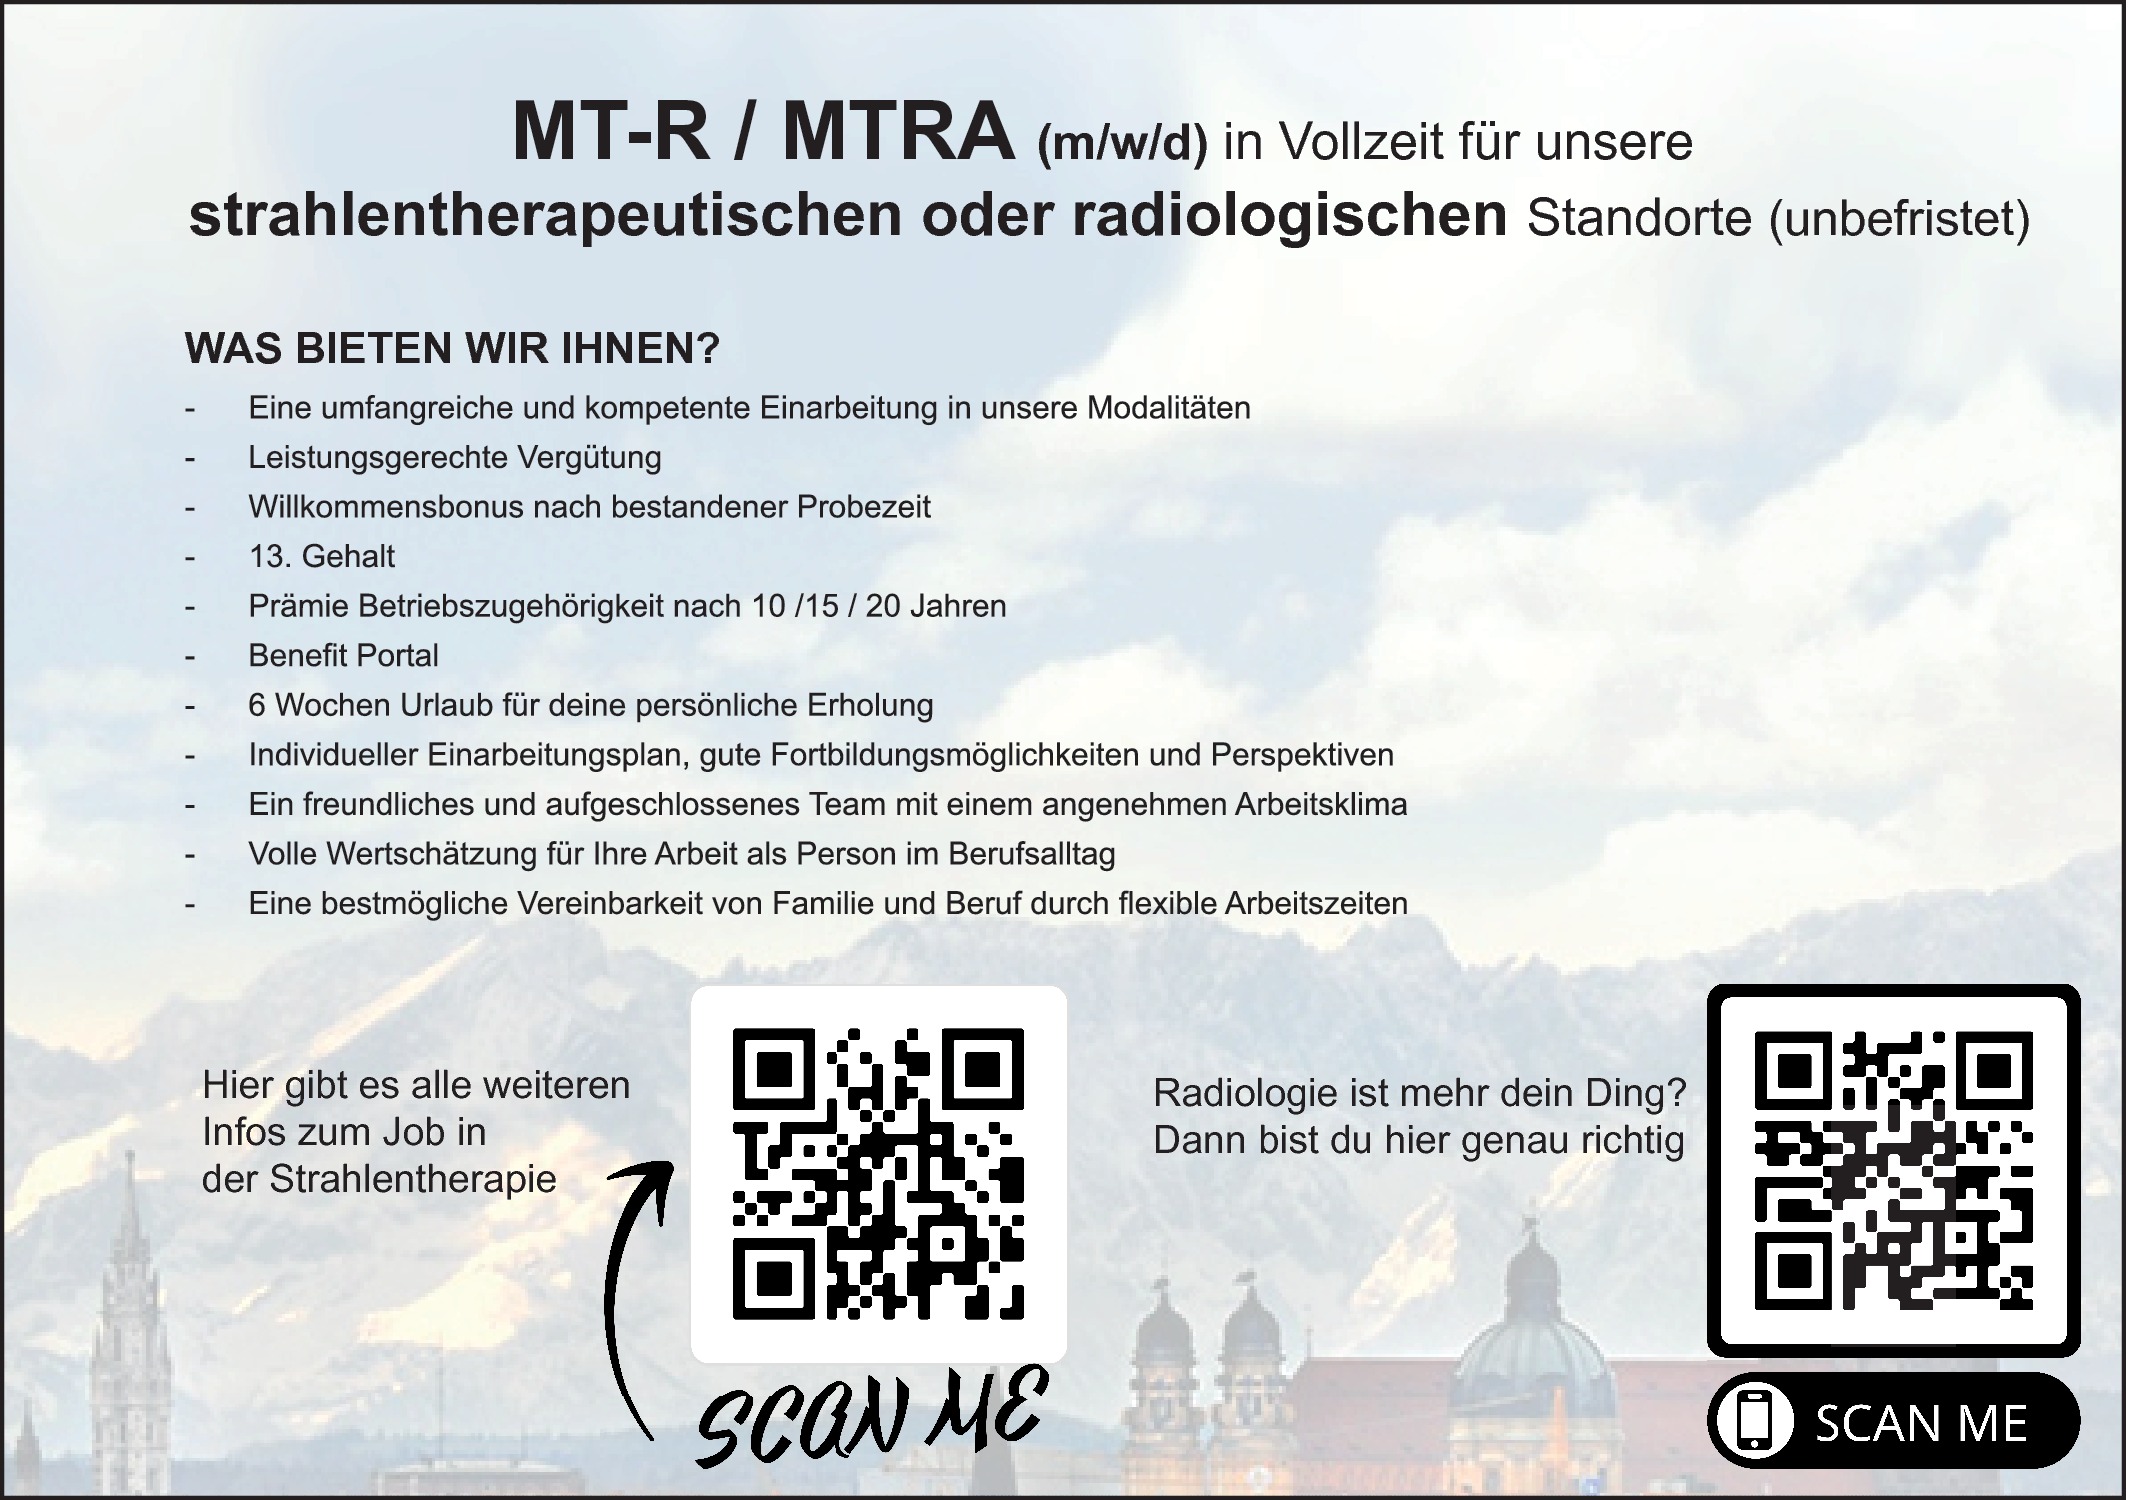 MTRA (m/w/d) 